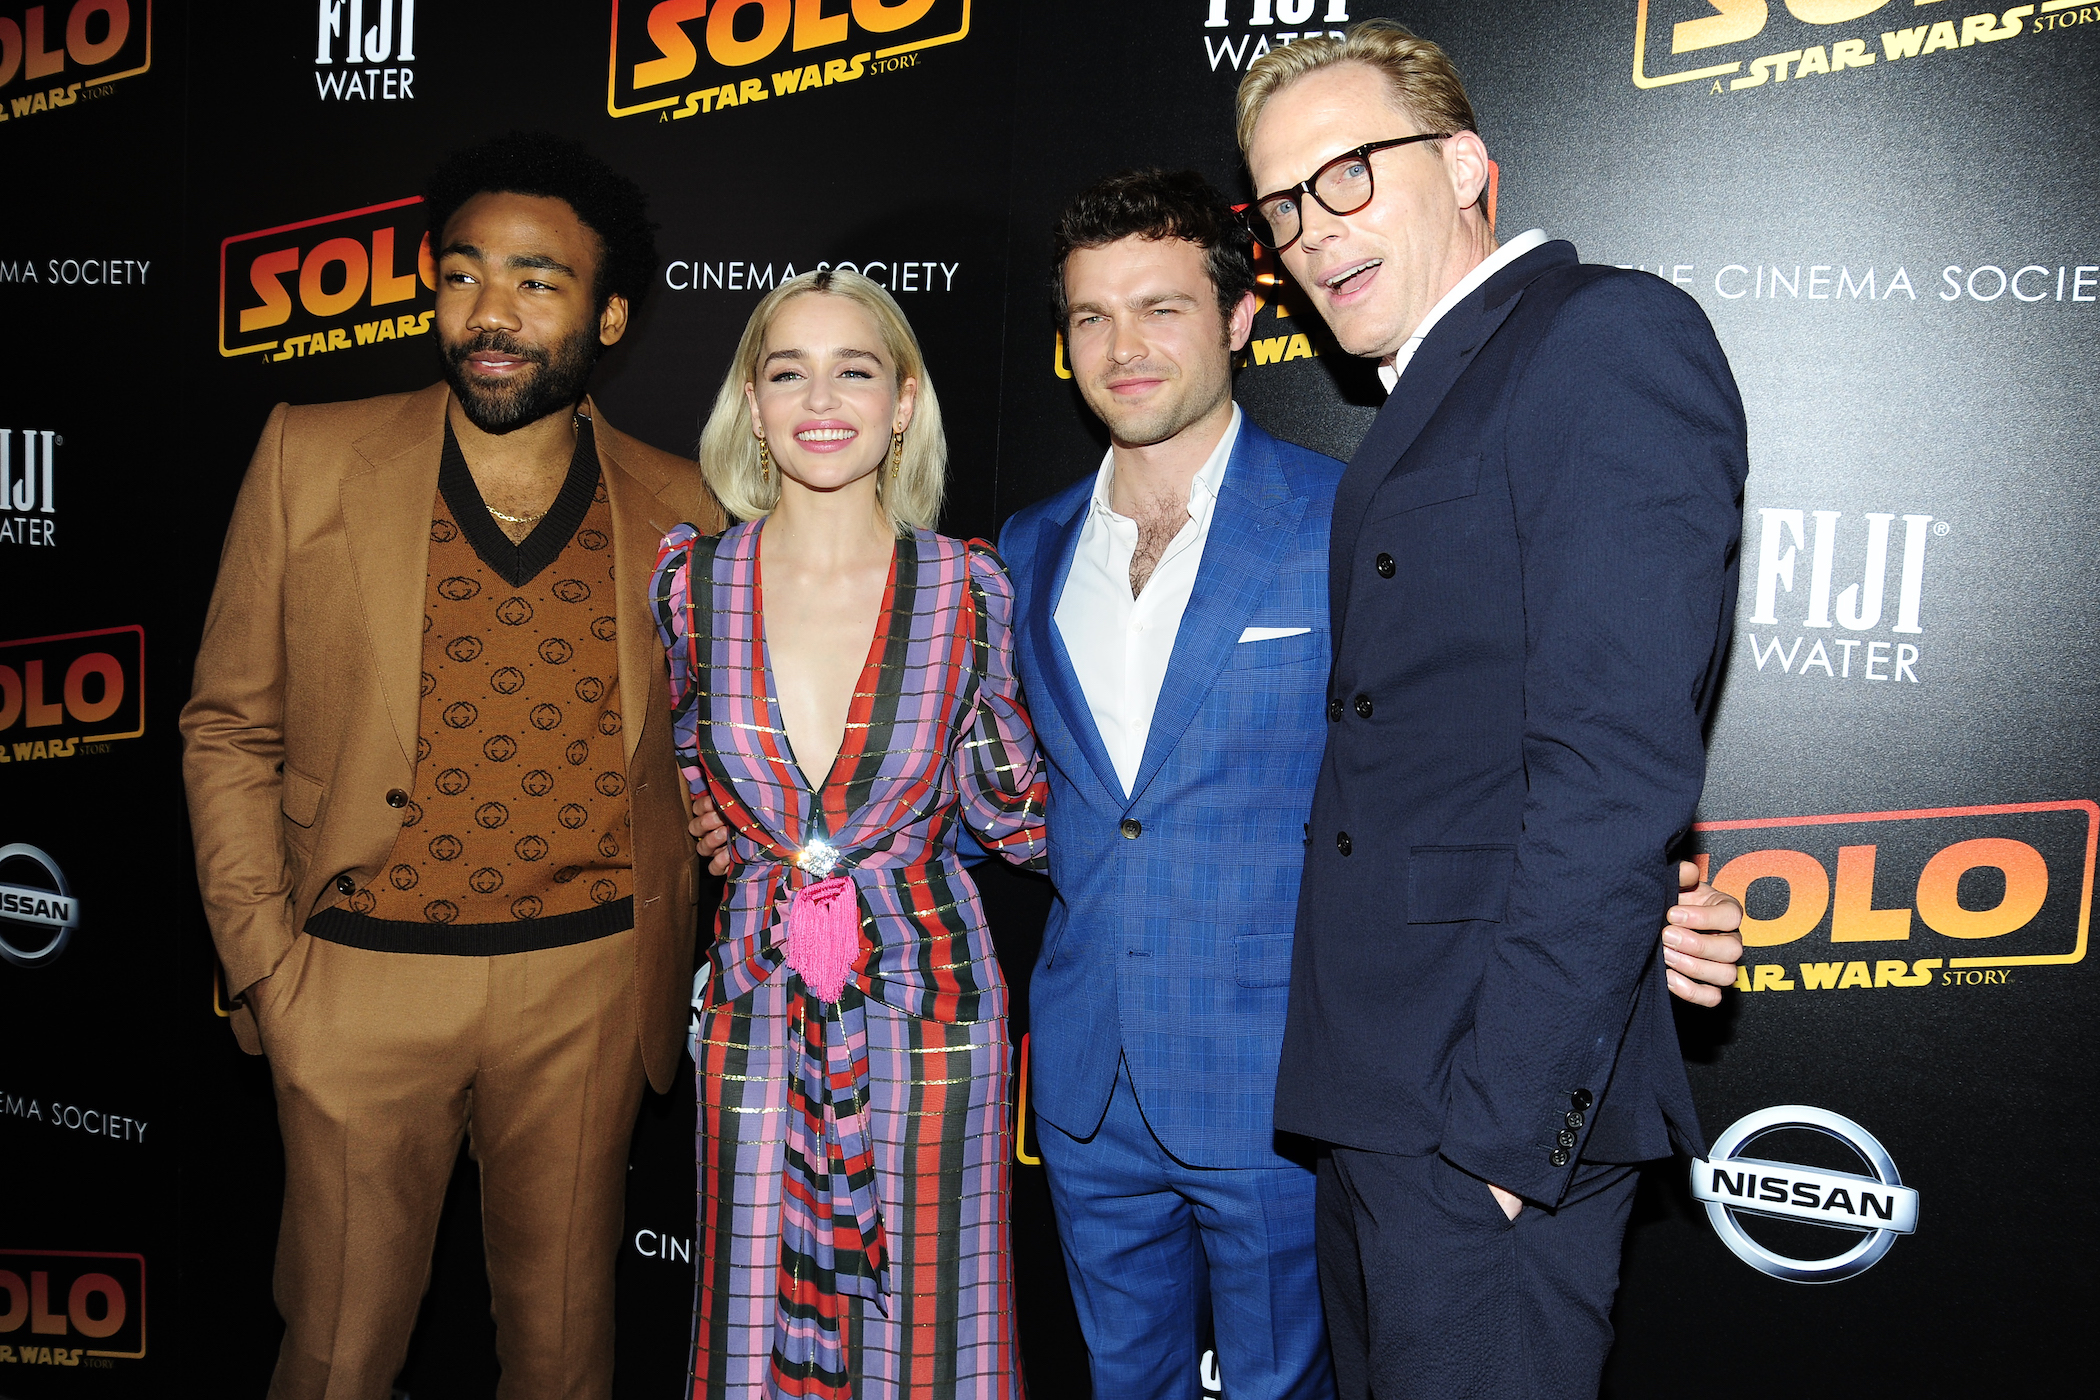 Donald Glover, Emilia Clarke, Alden Ehrenreich, and Paul Bettany of 'Solo: A Star Wars Story' 